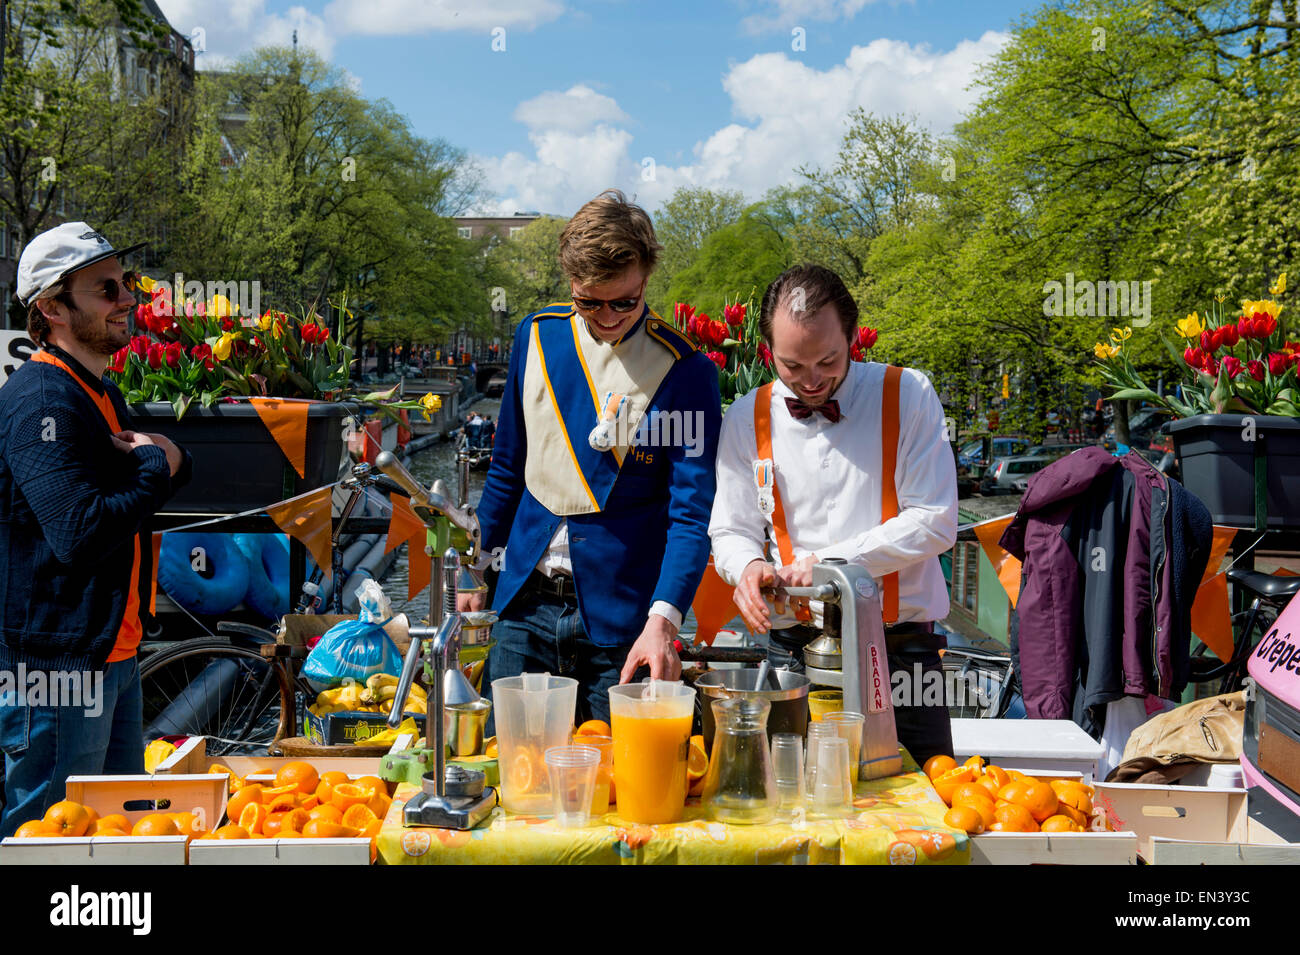 Amsterdam, Netherlands. 27th April, 2015. Dutch people celebrate the